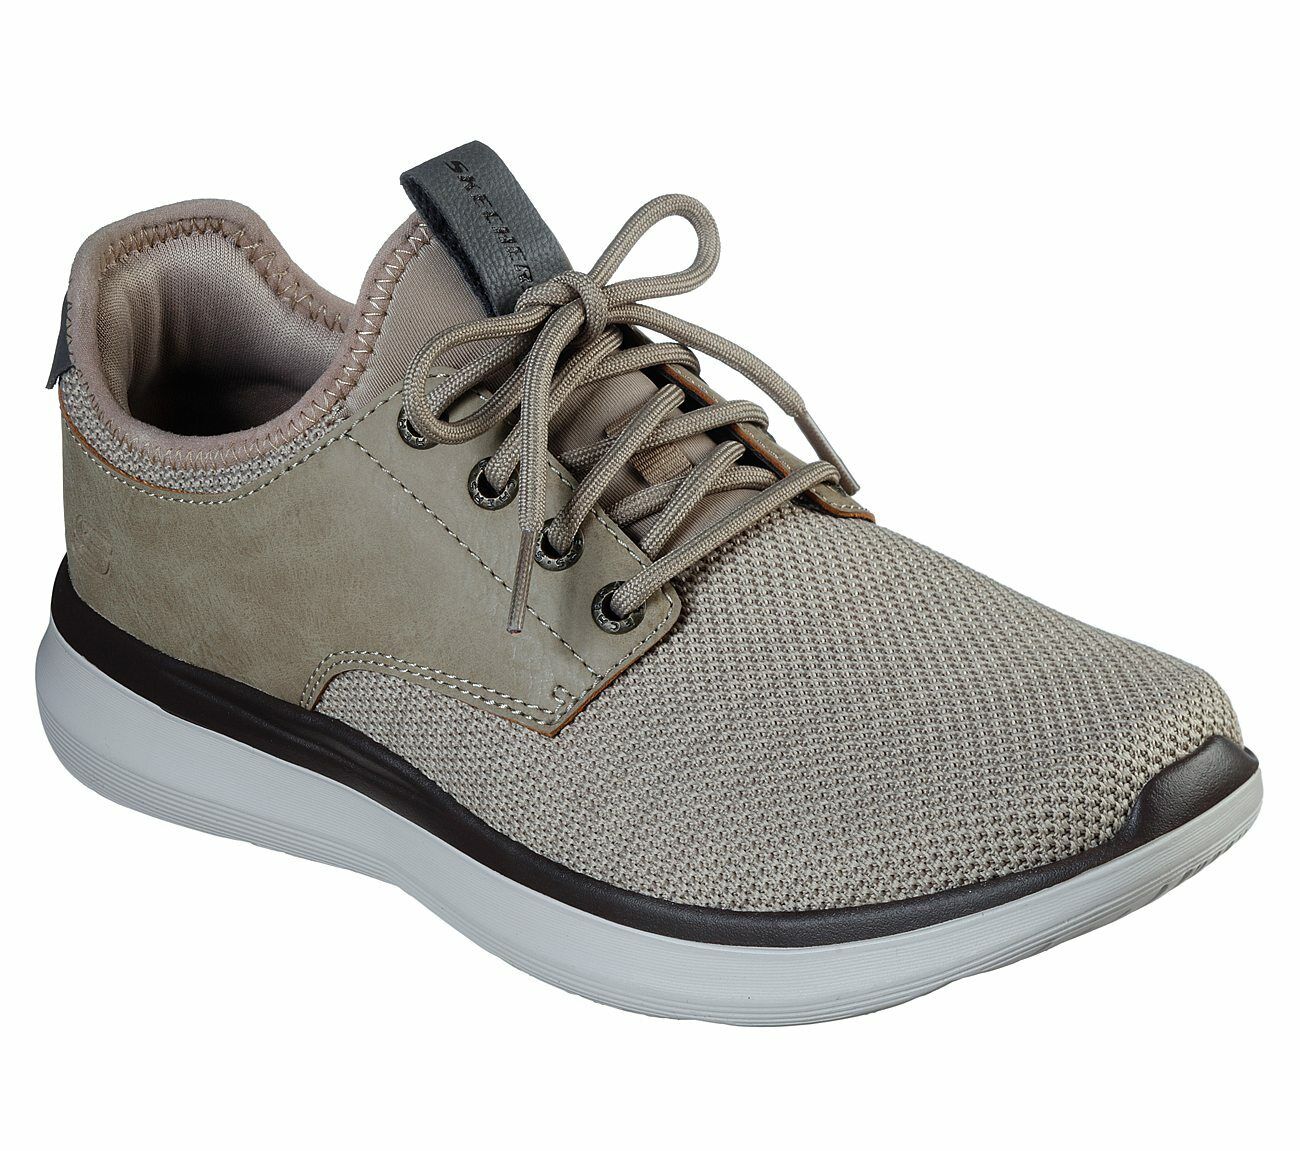 Skechers Shoes Men Taupe Special sale item Memory Comfort Oxford Casual Soft Foam Max 85% OFF